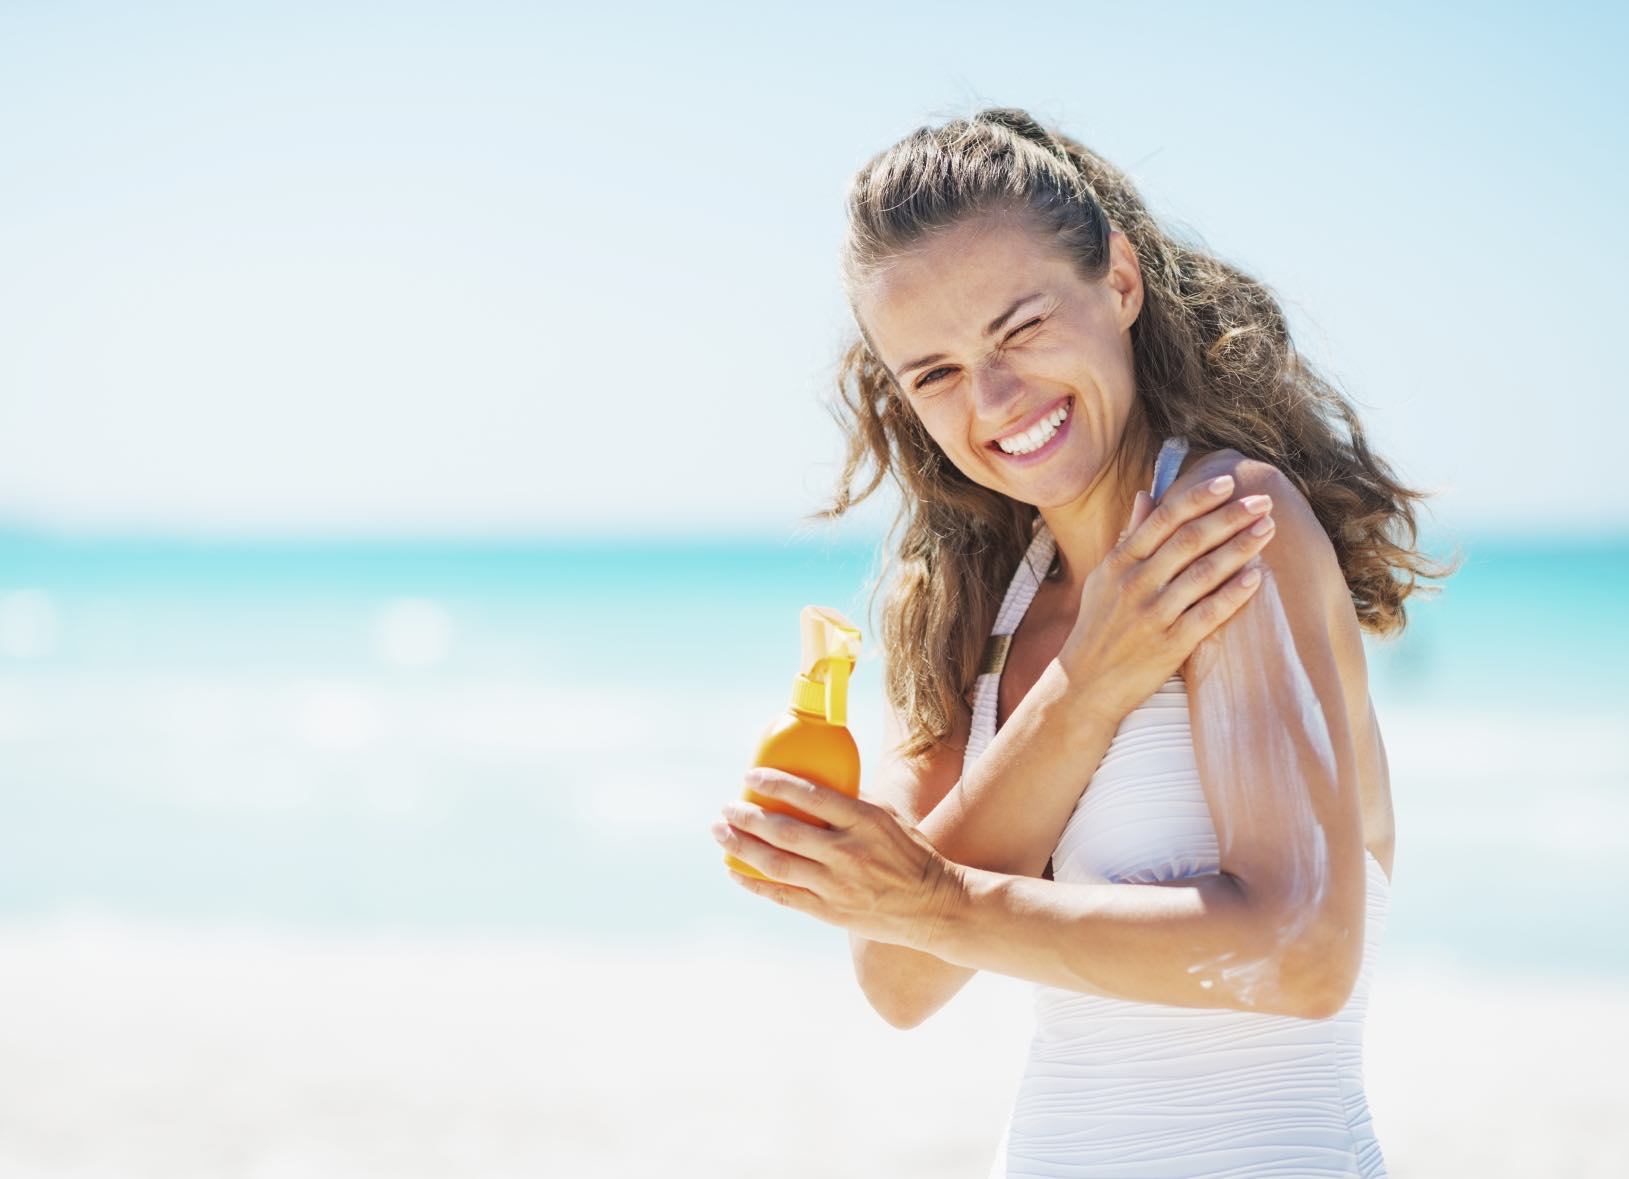 Protect that pout! Learn how you can defend your kisser from sun damage and skin cancer: